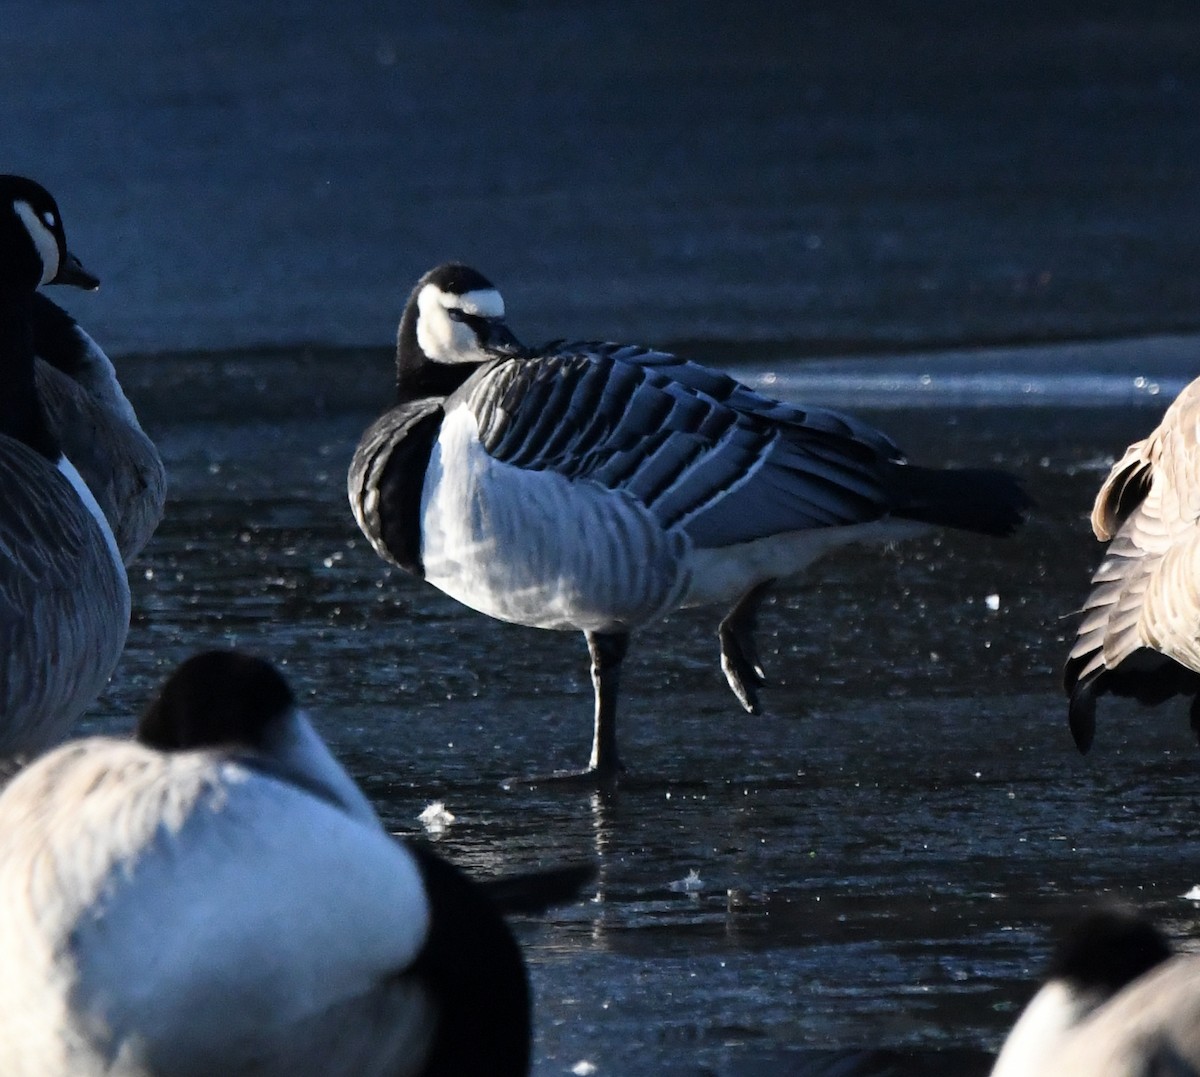 Barnacle Goose - A Emmerson